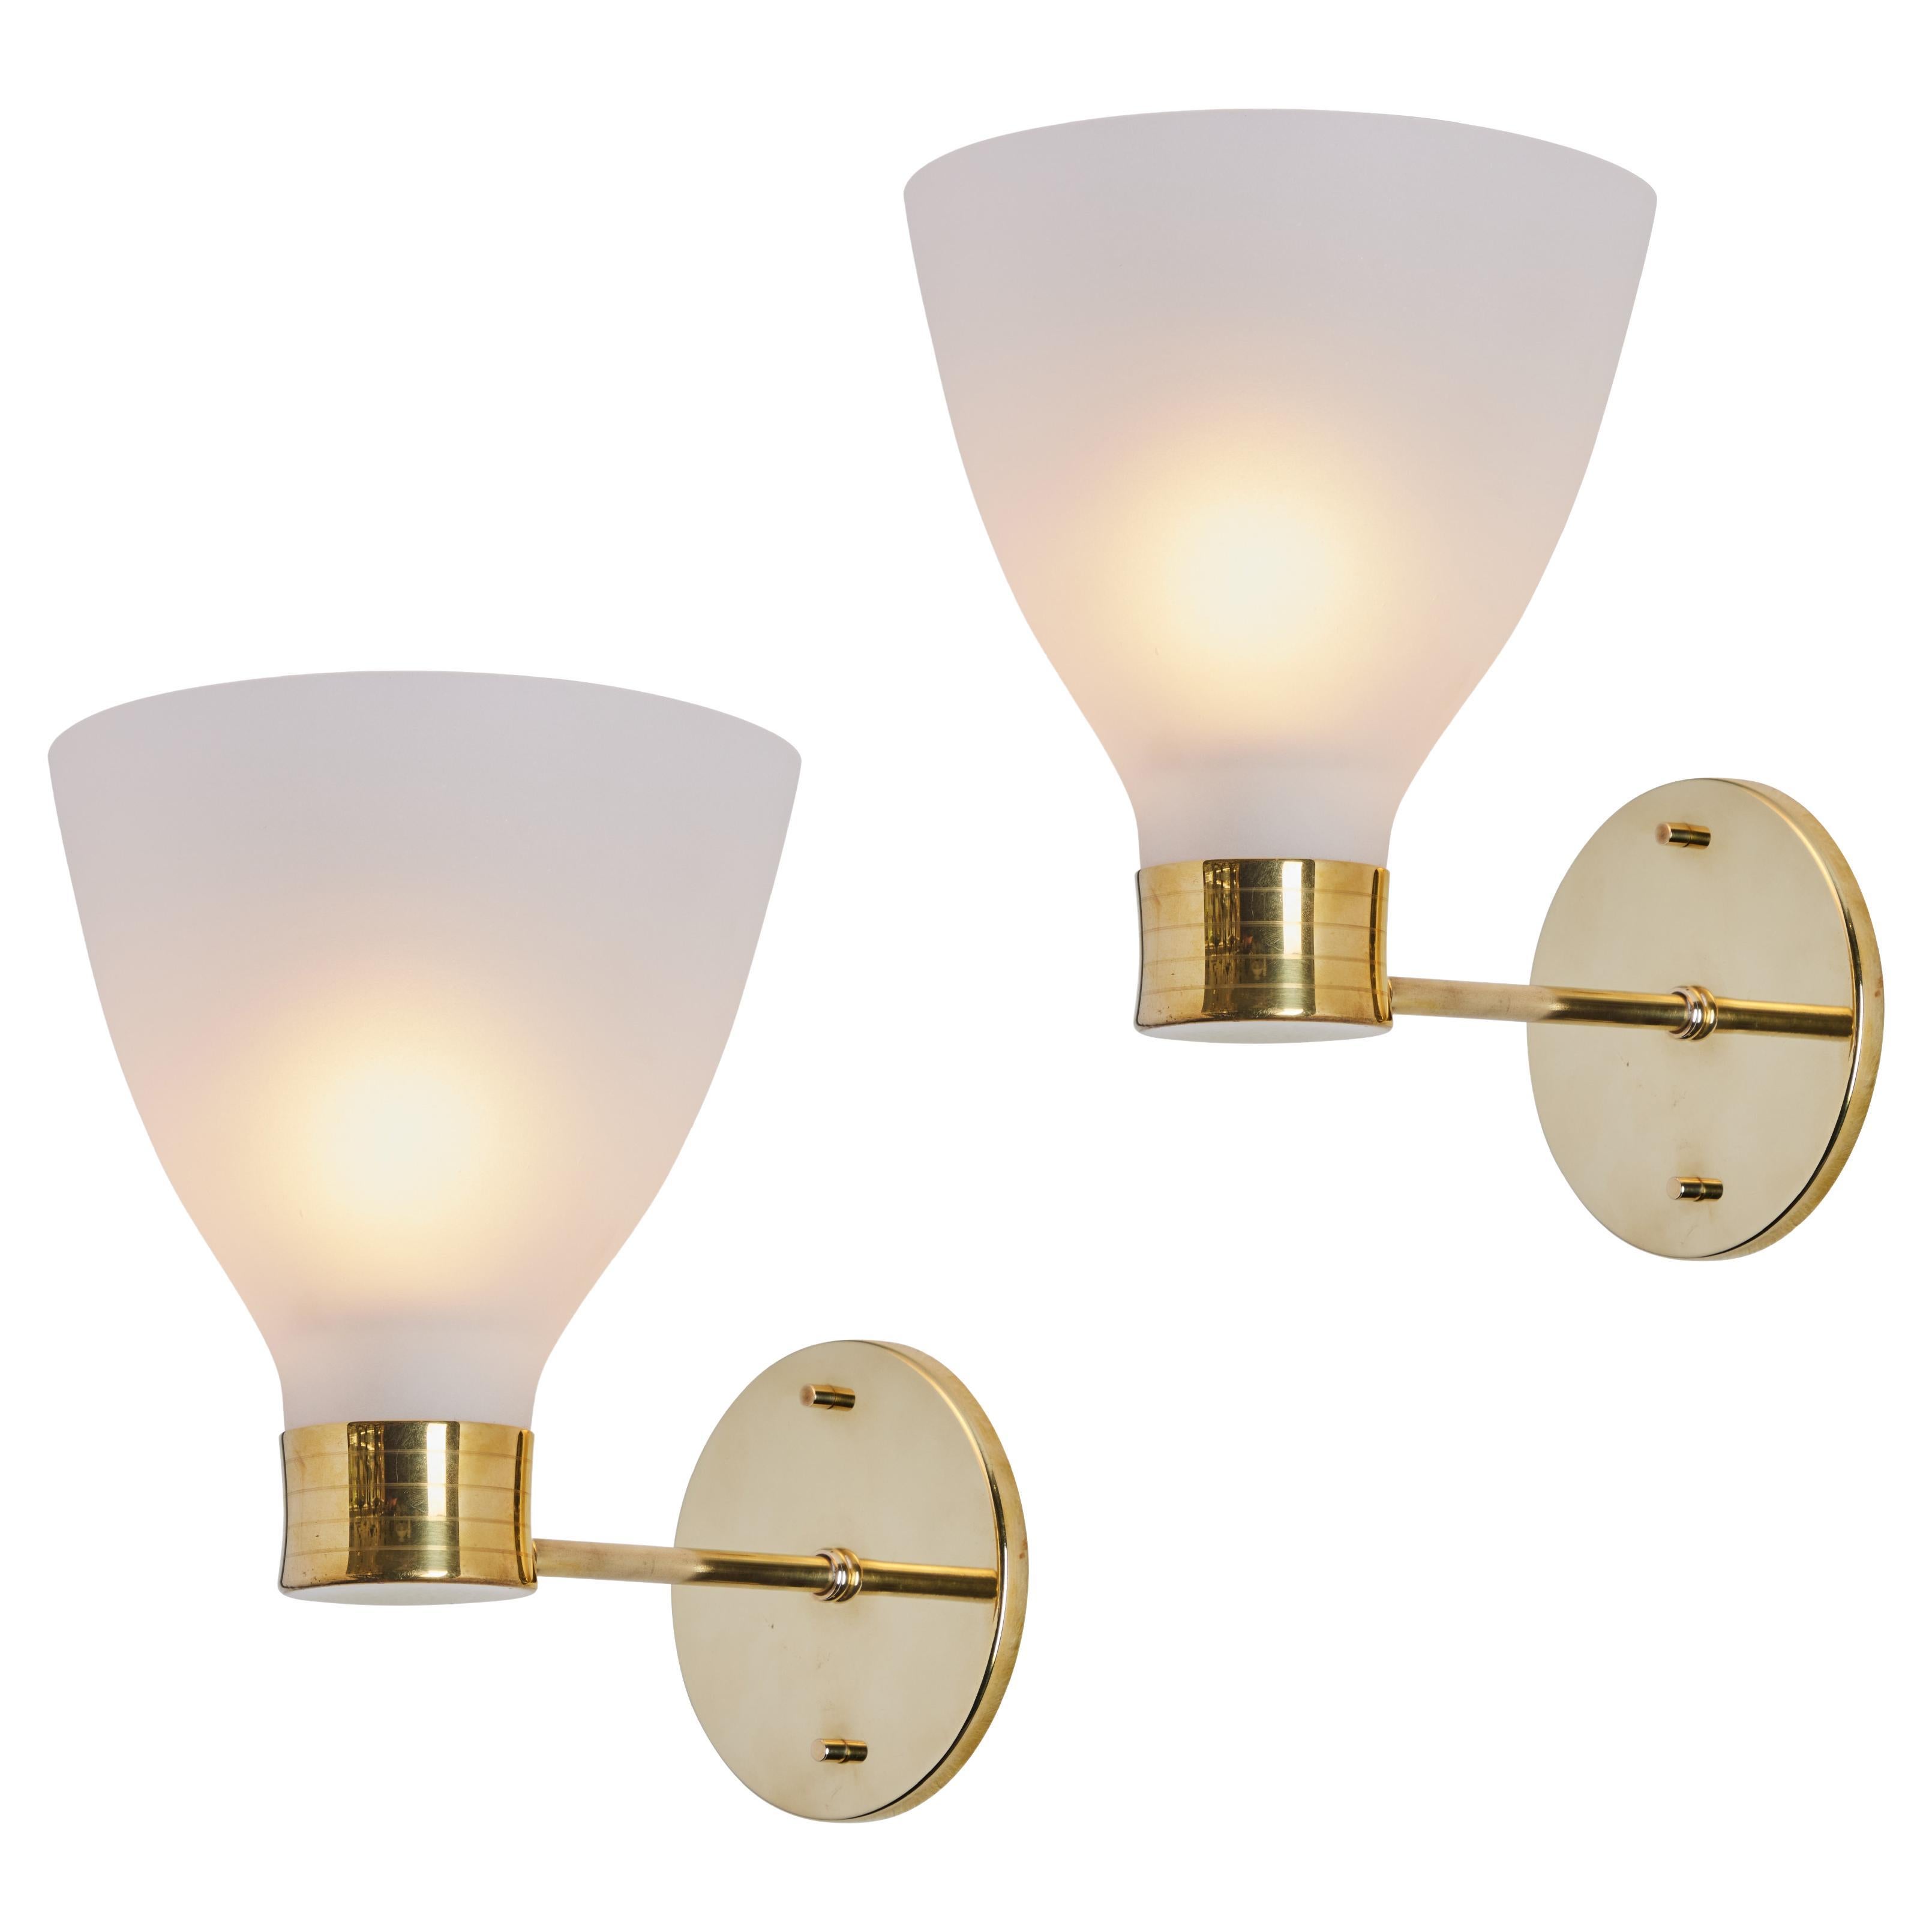 Pair of 1950s Lisa Johansson-Pape Opaline Glass & Brass Wall Lamps For Sale